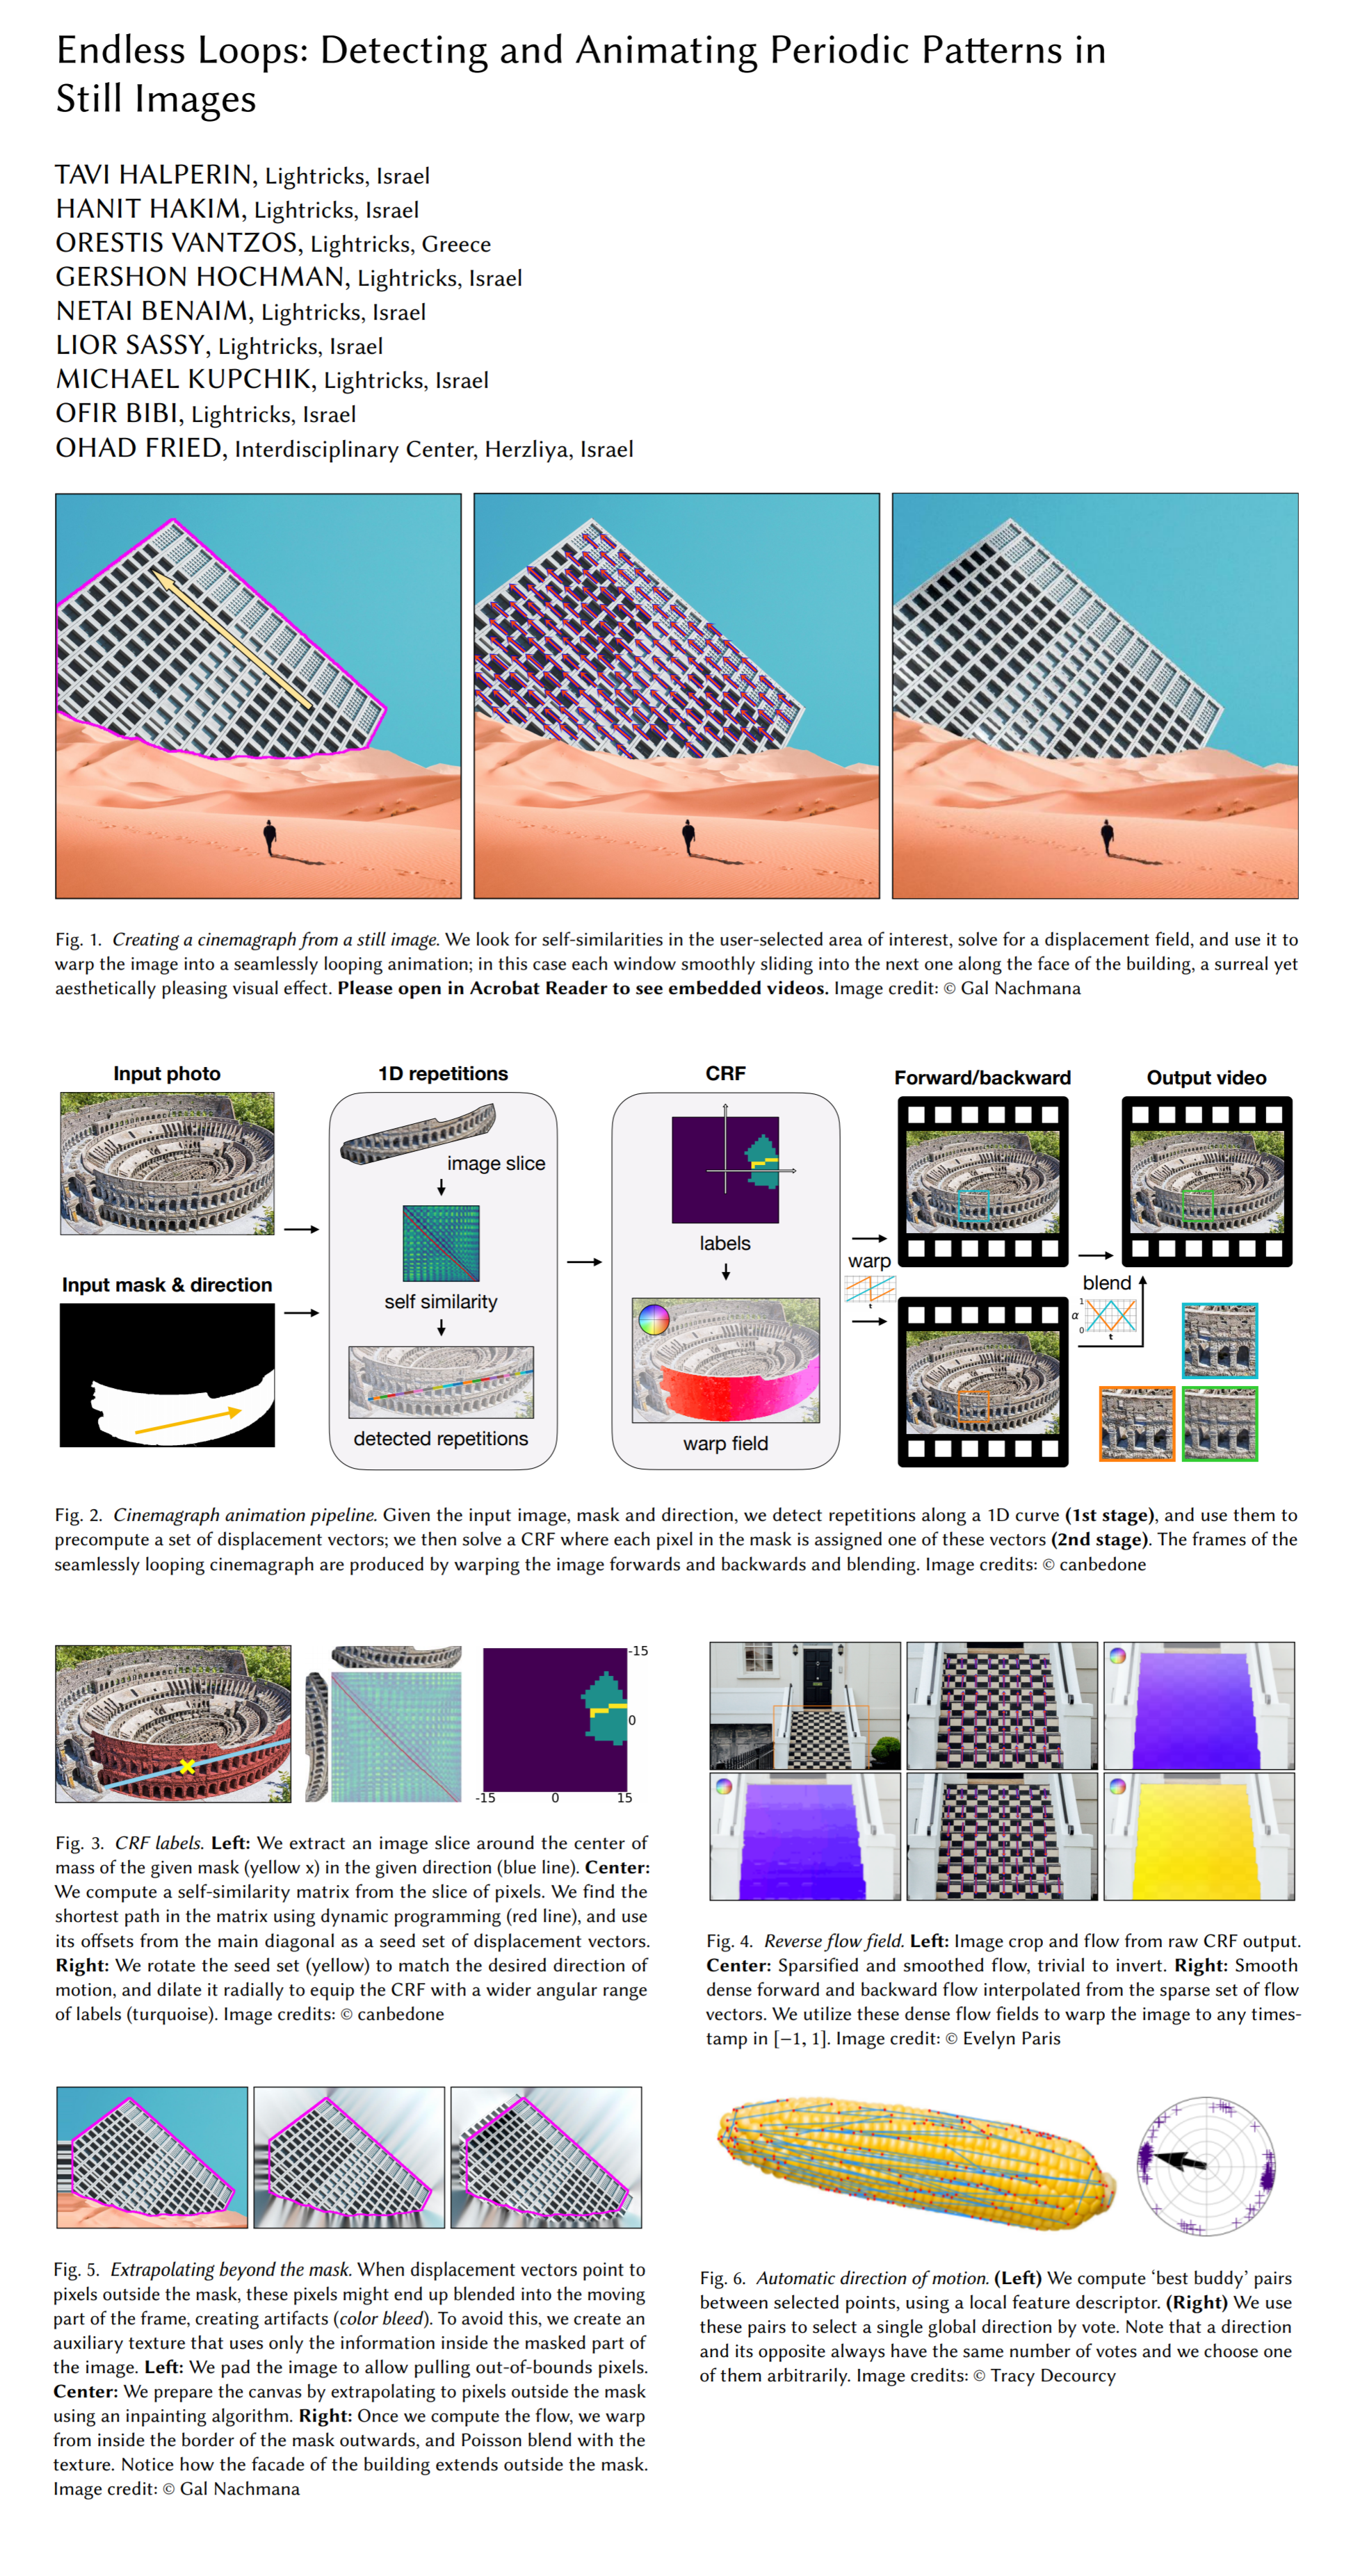 Endless Loops: Detecting and Animating Periodic Patterns in Still Images paper poster